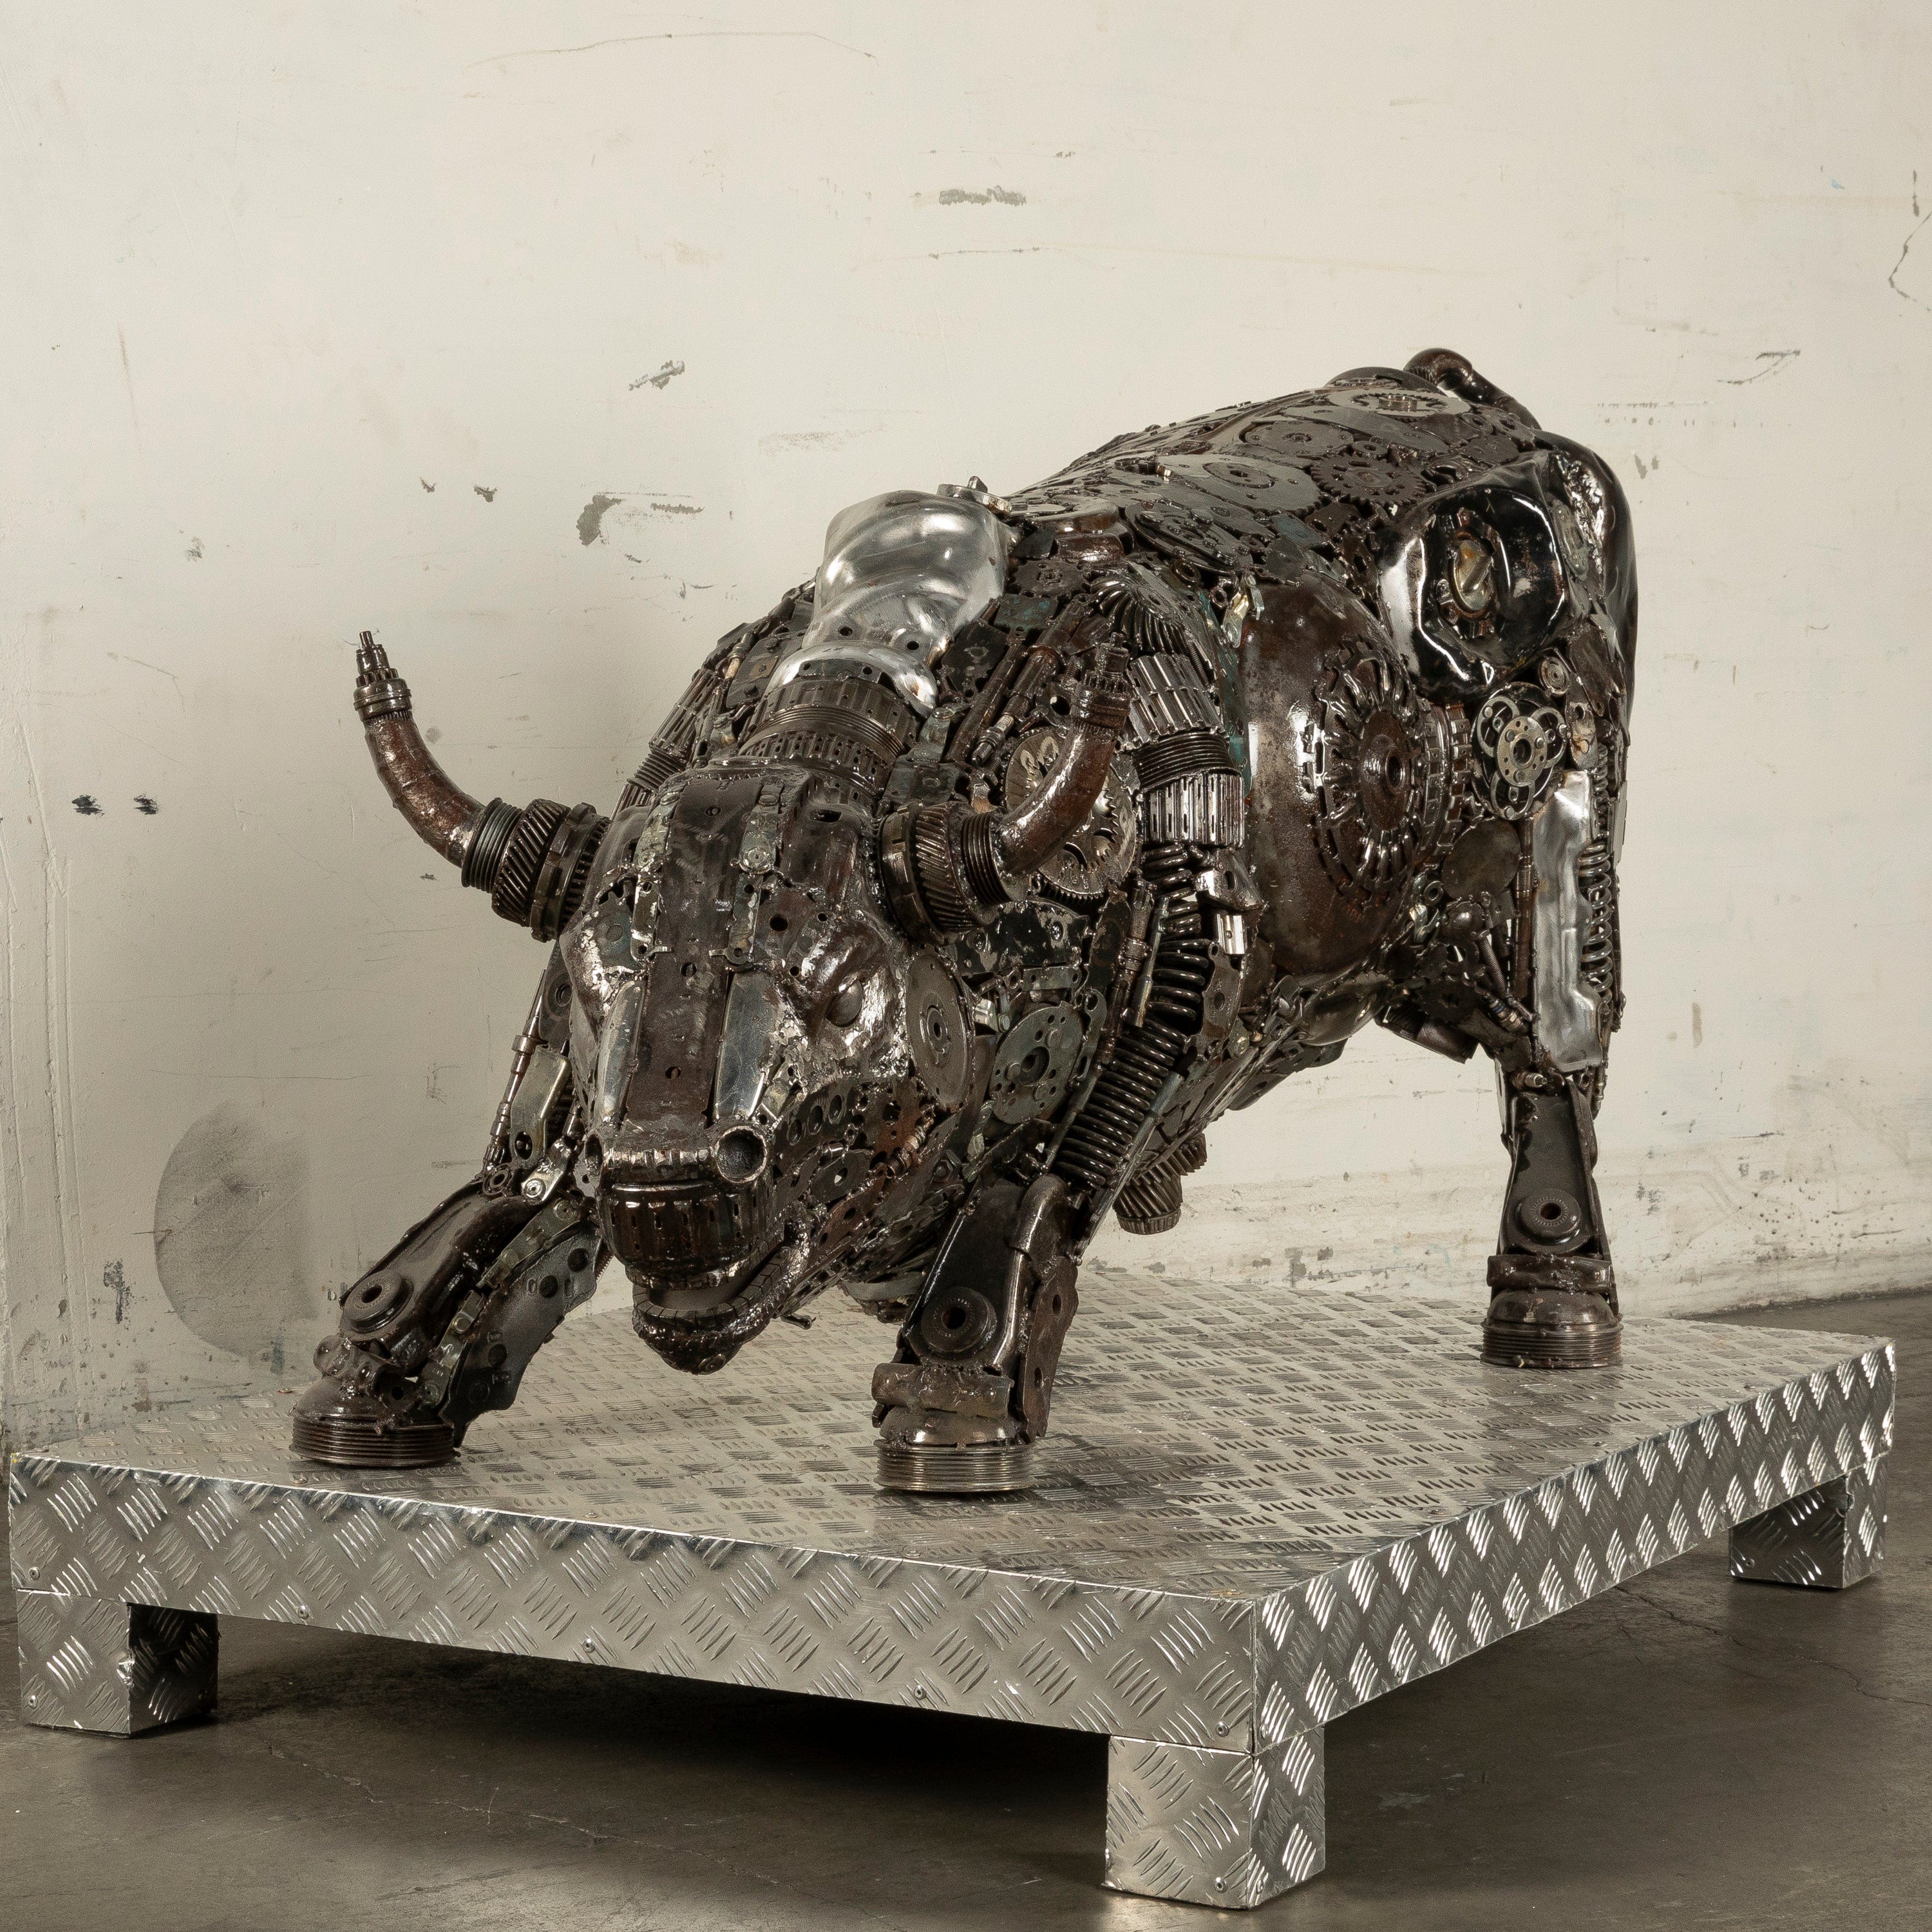 Kalifano Recycled Metal Art 60" Wall Street Bull Inspired Recycled Metal Art Sculpture RMS-BULL150-N